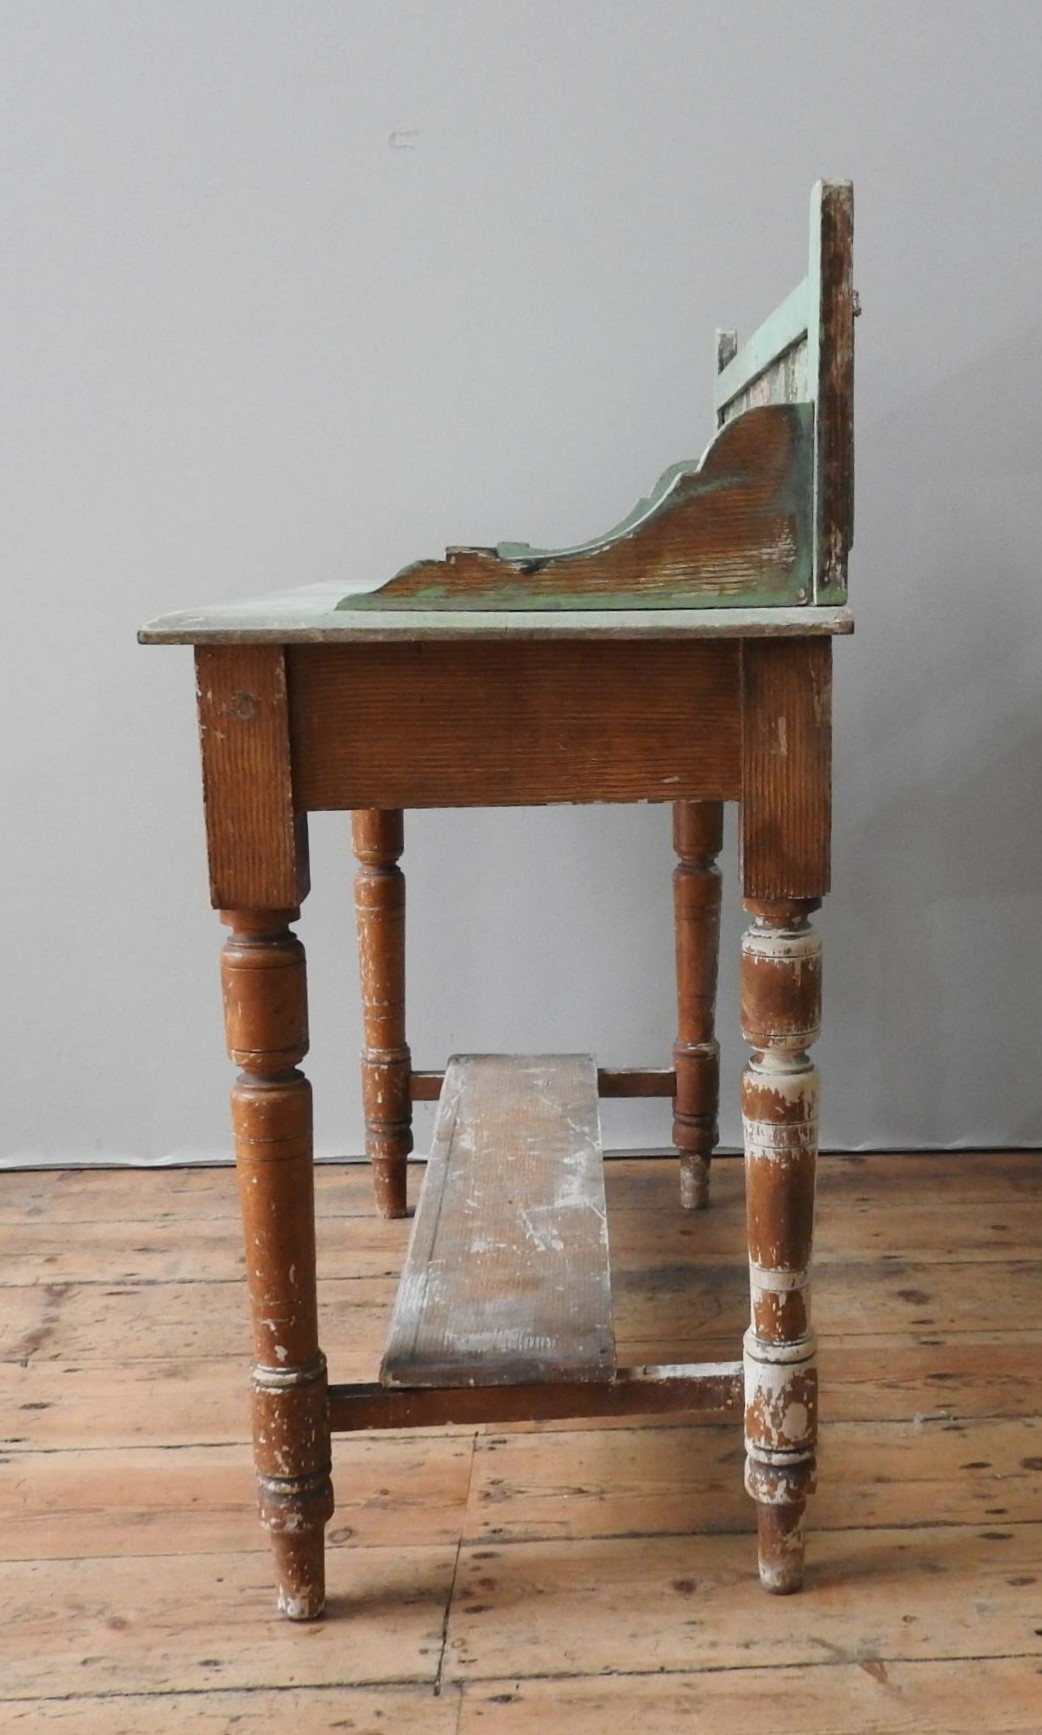 A 19th CENTURY PINE GRAIN PAINTED TILE BACK WASH STAND, 100 x 91 x 46 cm - Image 2 of 6